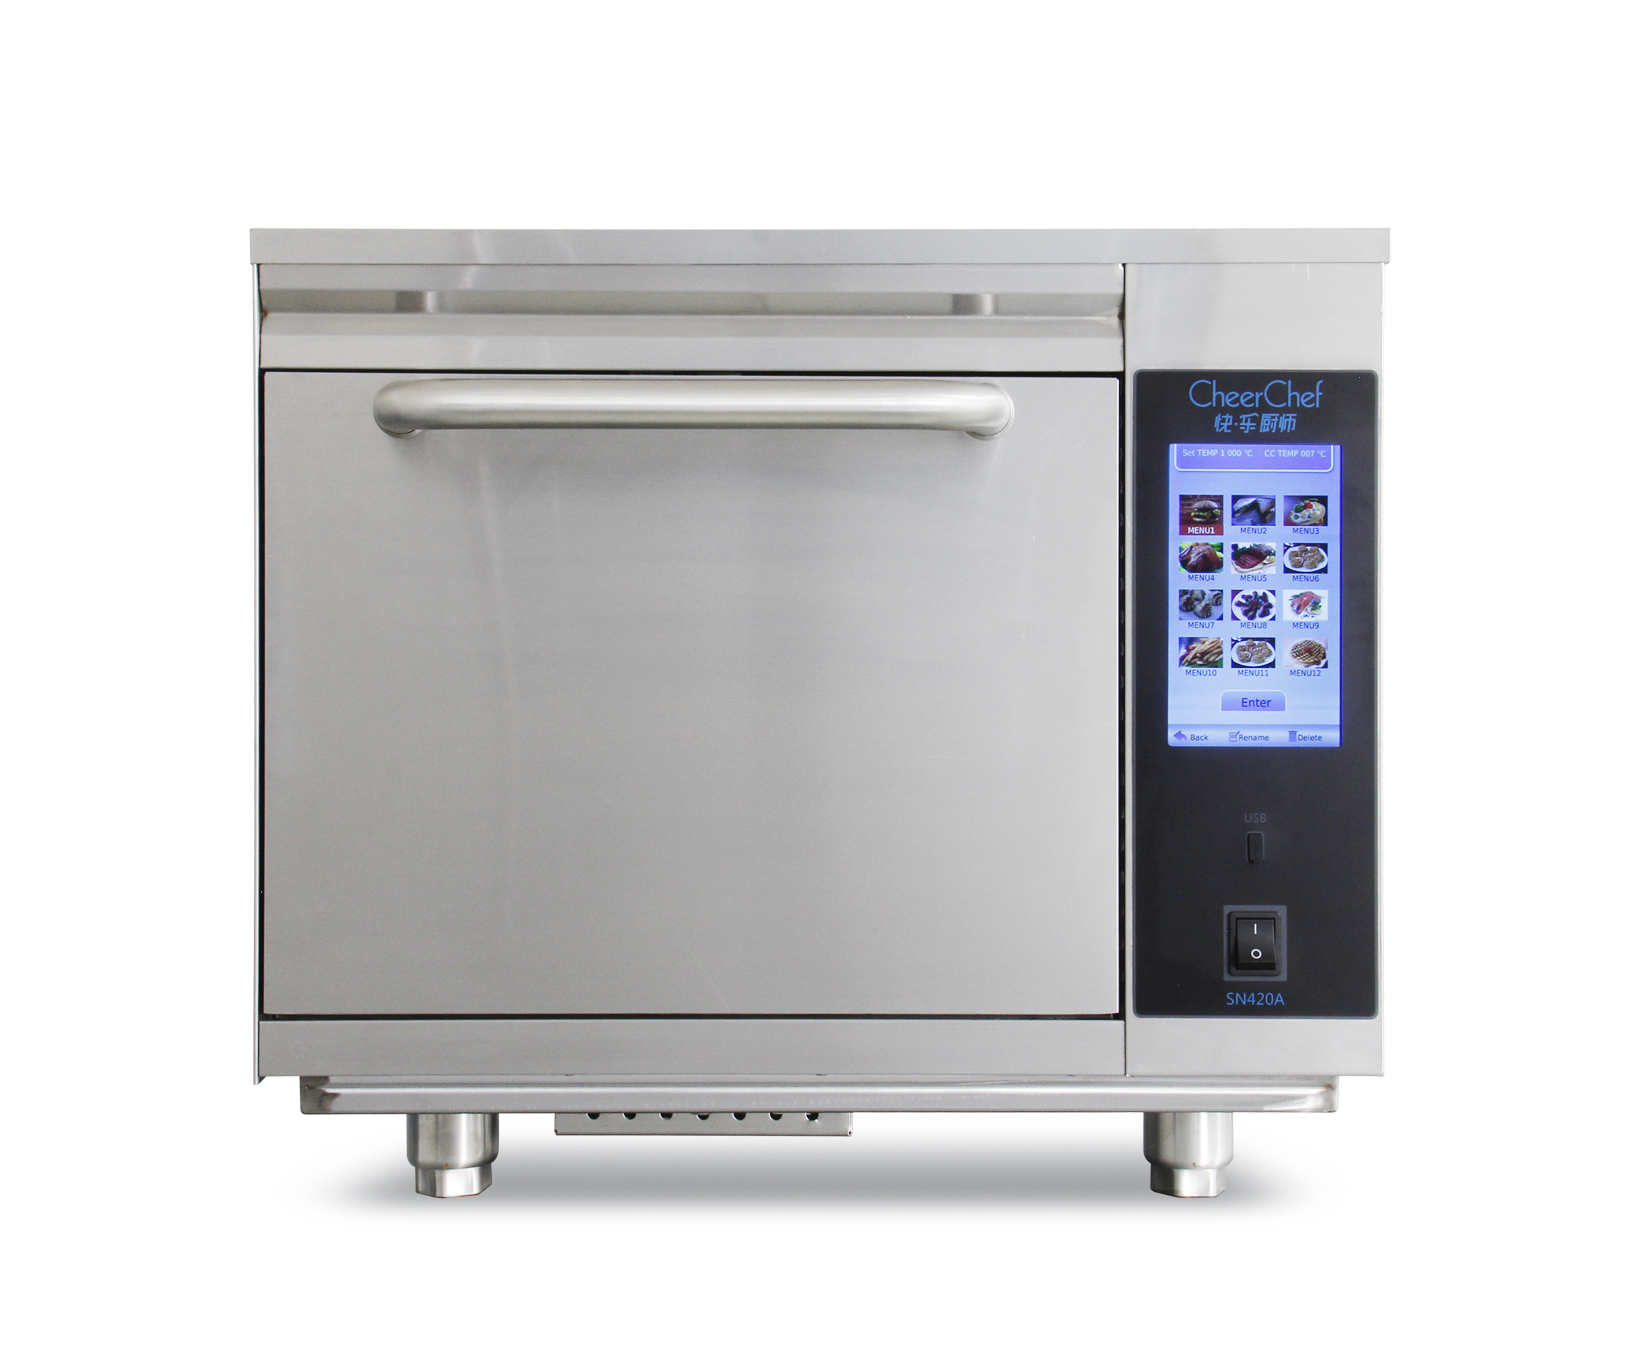 SN420E Model High-speed Accelerated Countertop Cooking Oven